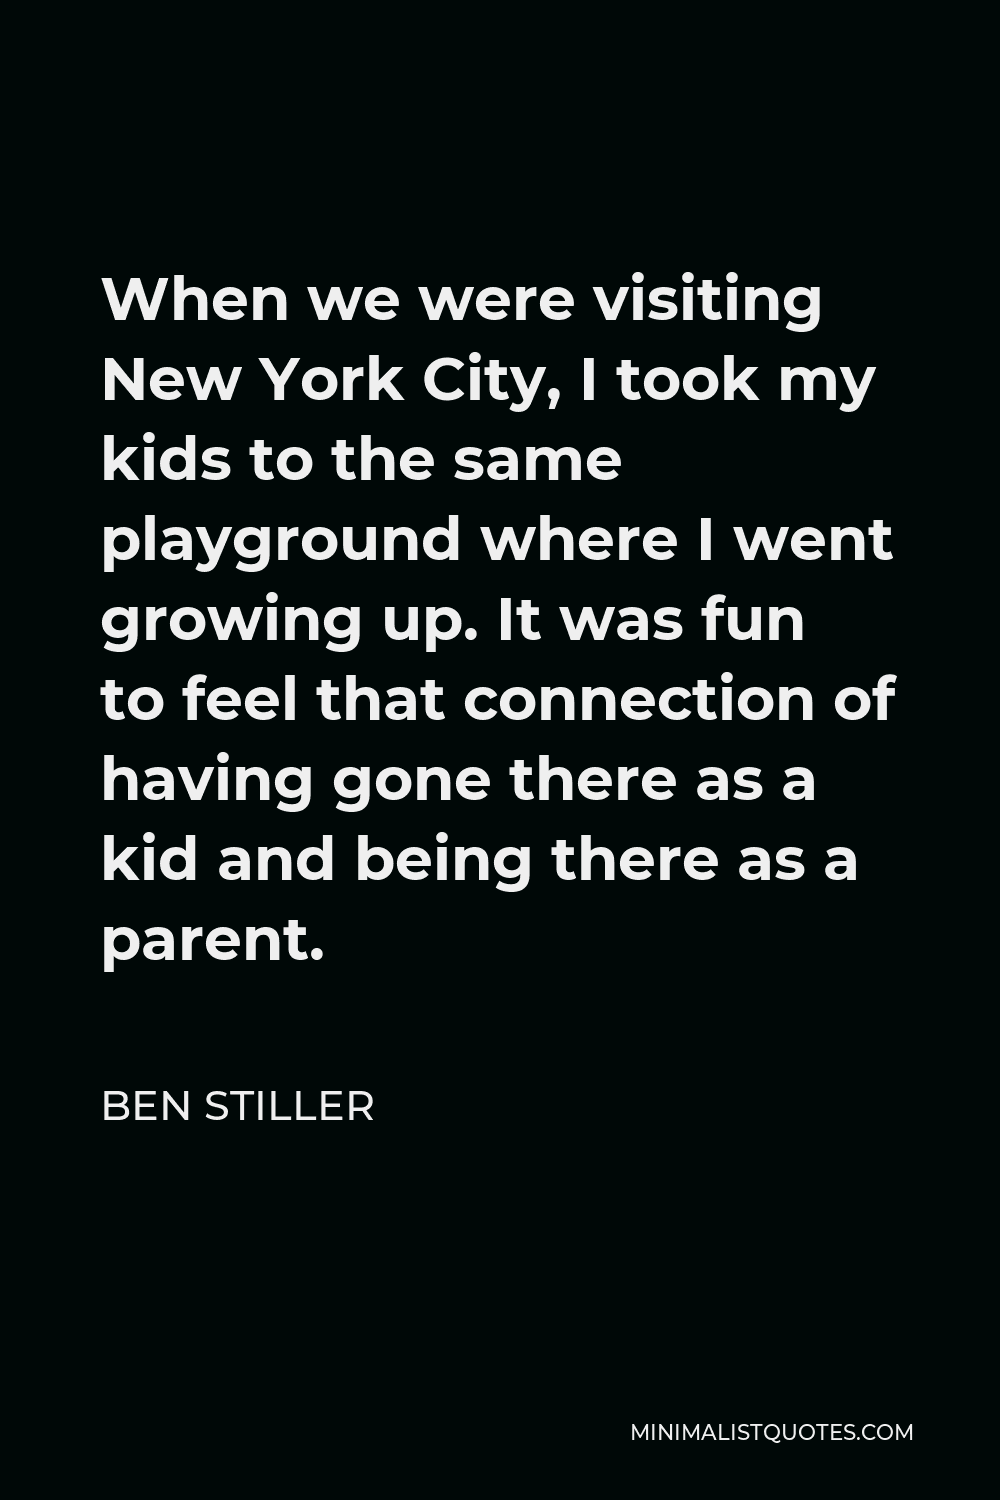 Ben Stiller Quote - When we were visiting New York City, I took my kids to the same playground where I went growing up. It was fun to feel that connection of having gone there as a kid and being there as a parent.